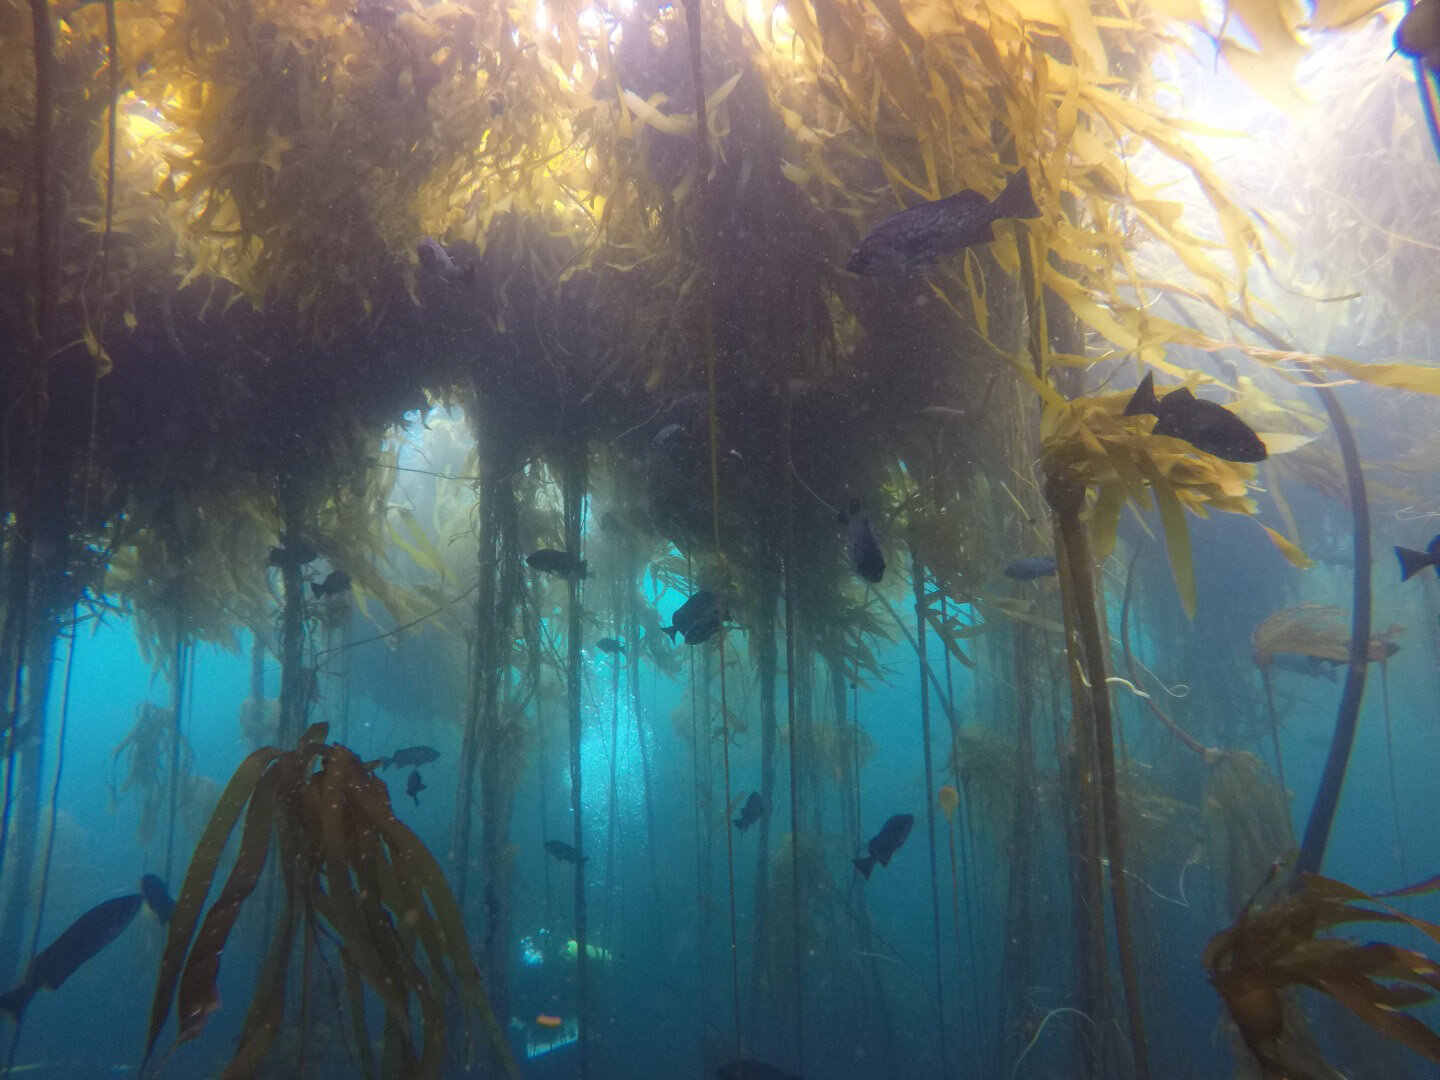 The collapse of Northern California kelp forests will be difficult to stop